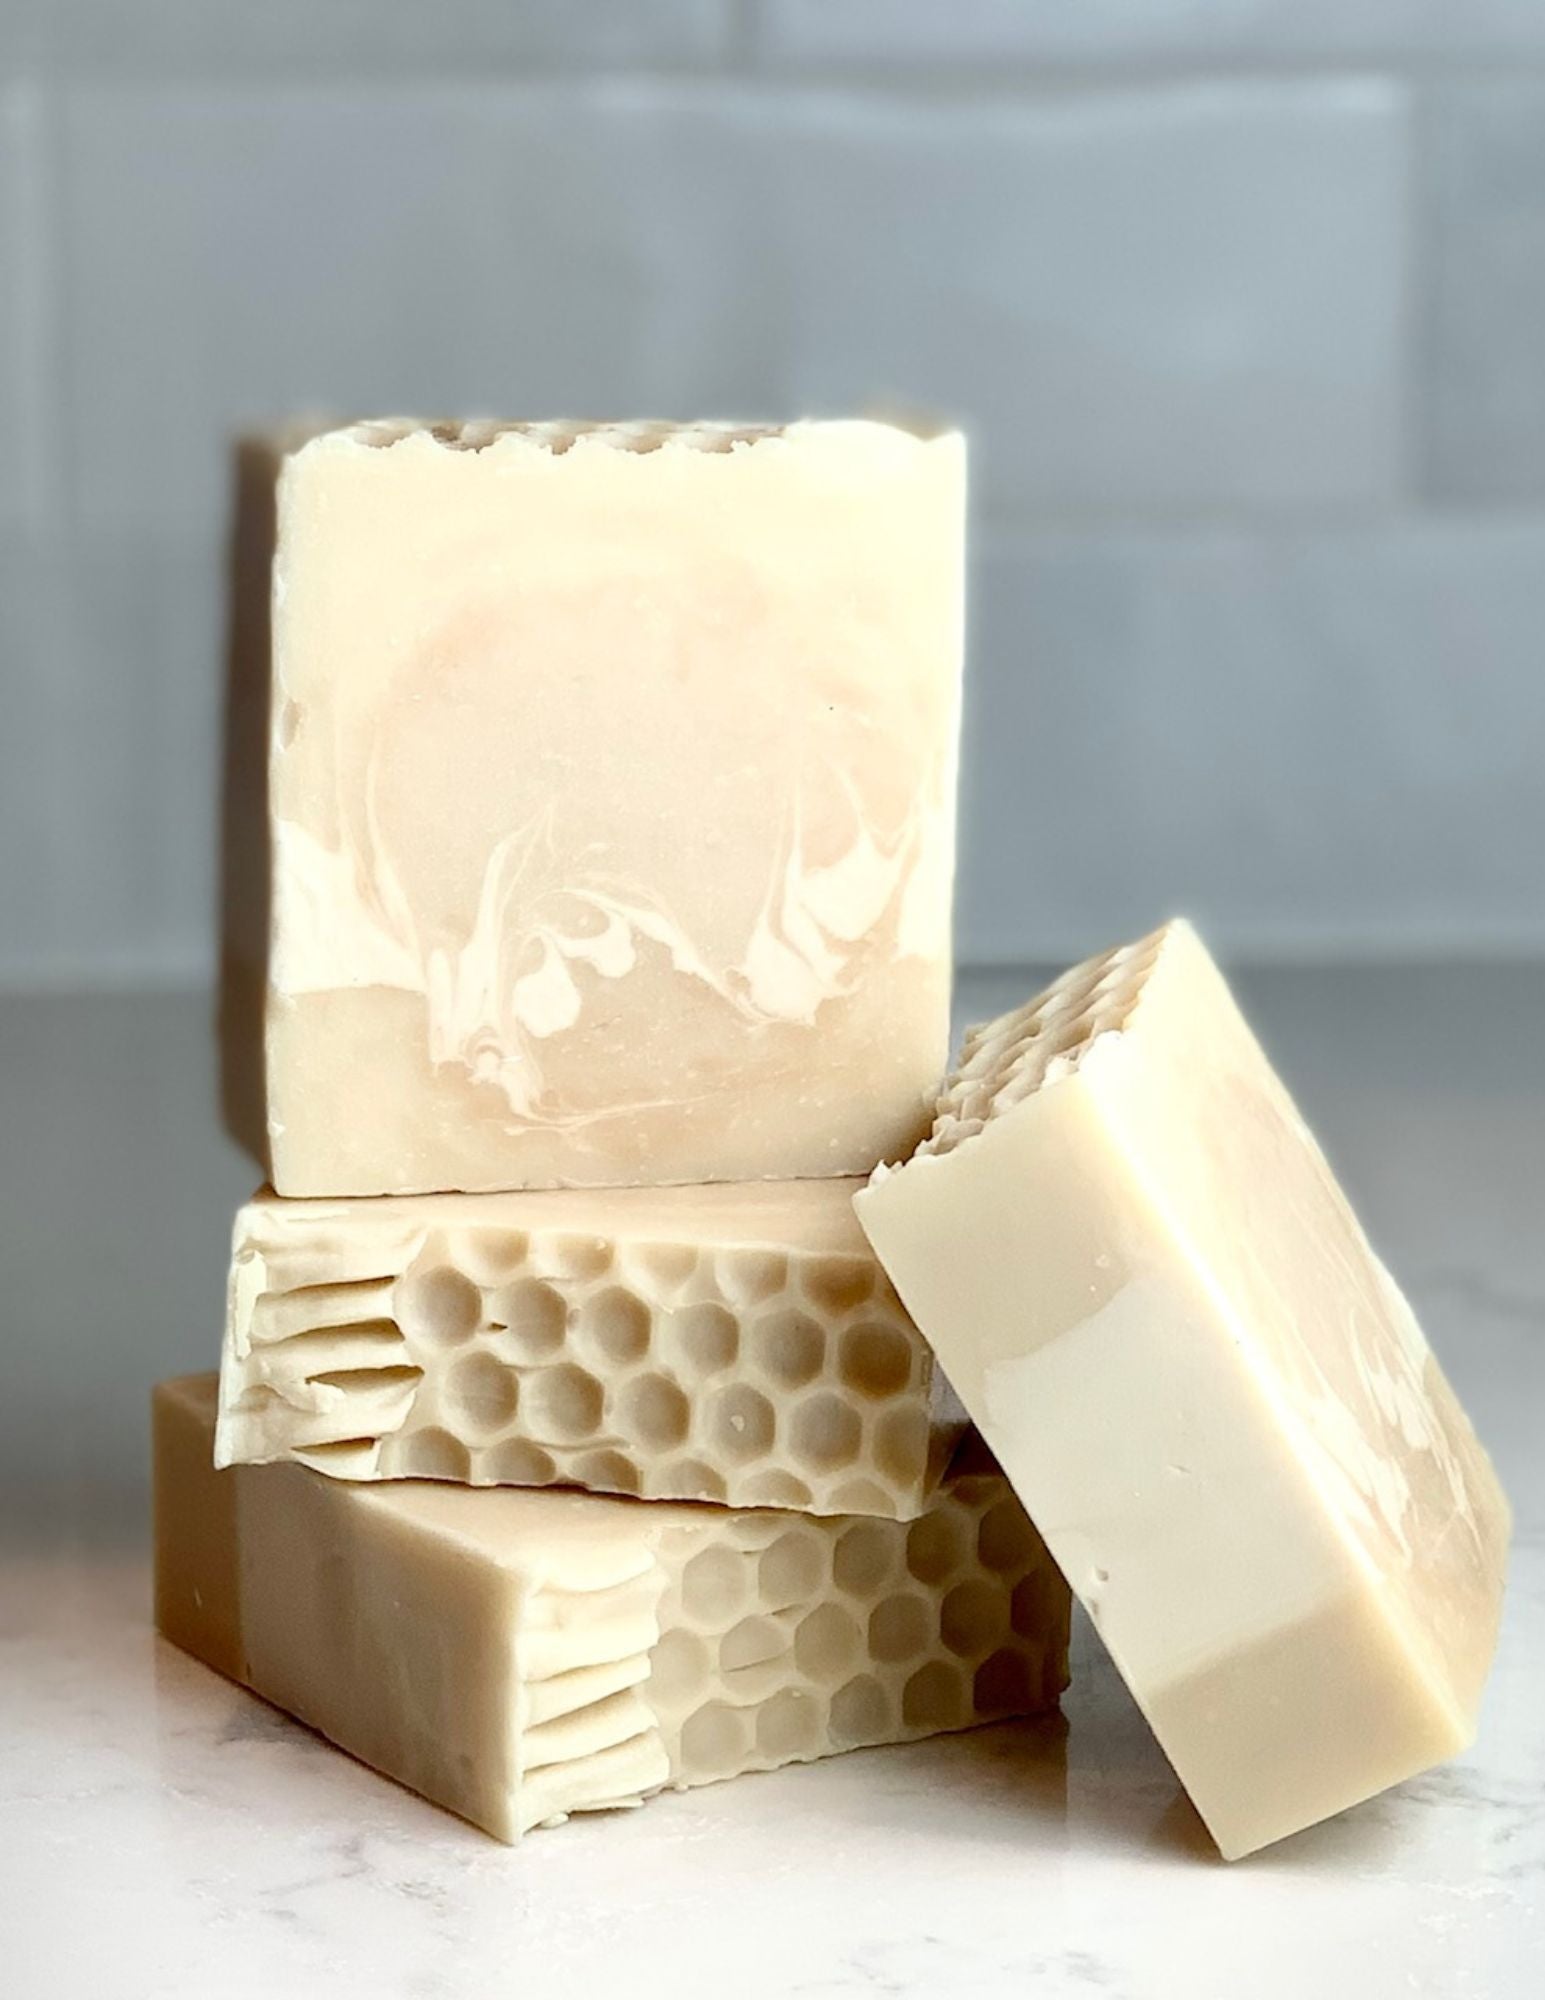 Triple Butter Honey soap stack of three with one leaning on stack detailing the honeycomb design on top and the white swirls in the honey colored soap. All are on a marble counter with a white tile backspash. 